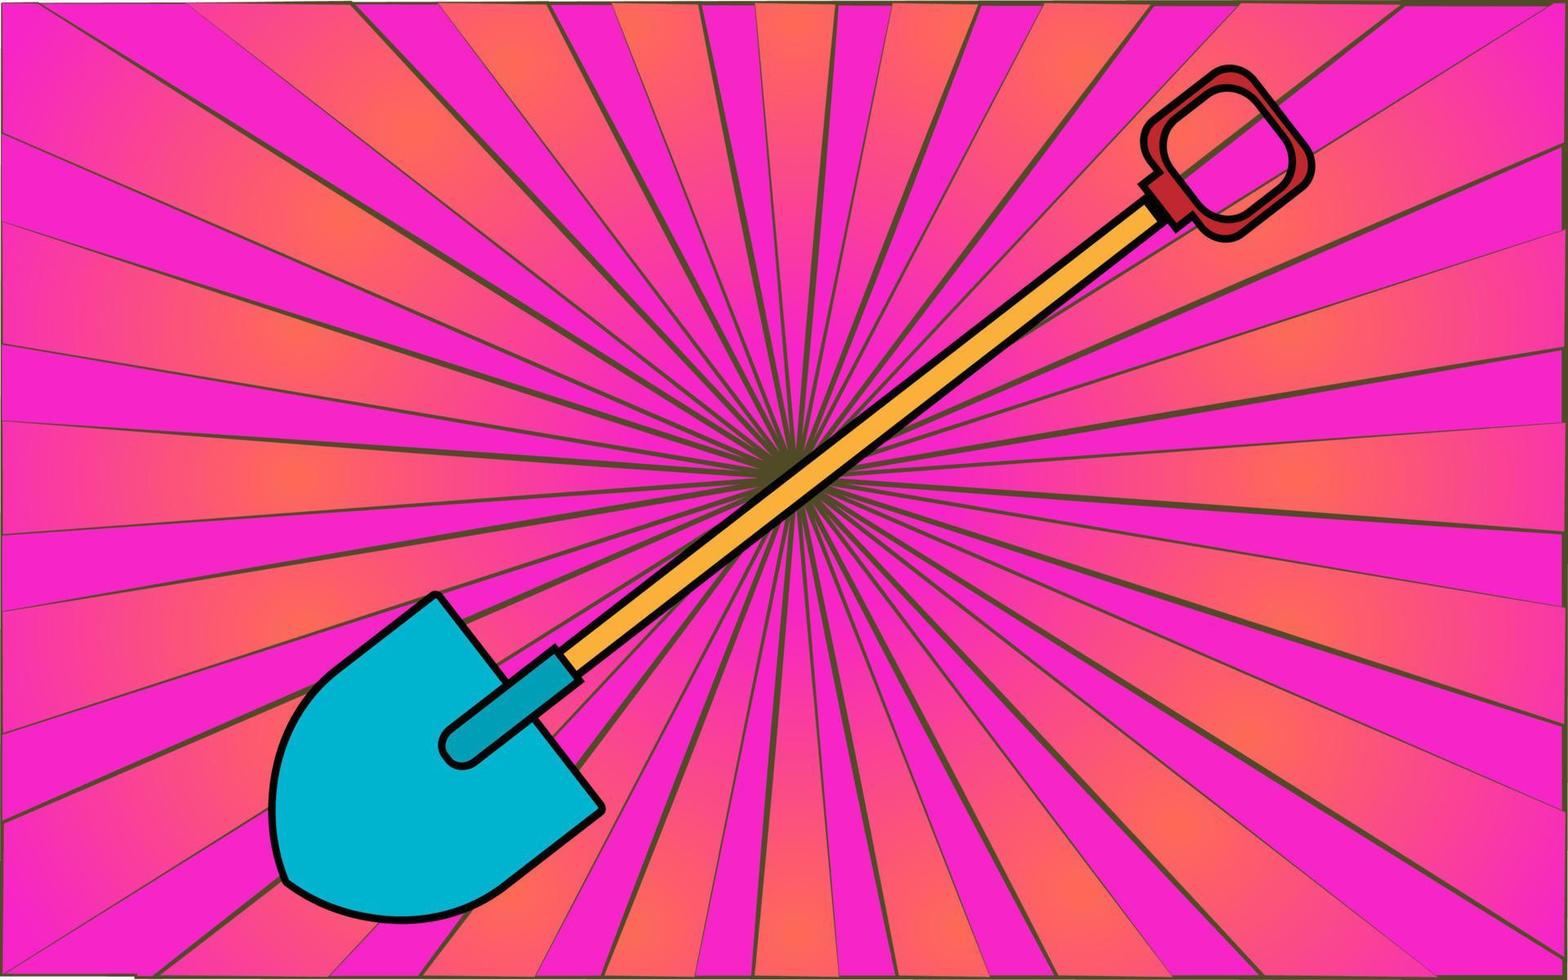 Construction repair garden tool shovel for digging the earth against a background of abstract purple rays. Vector illustration